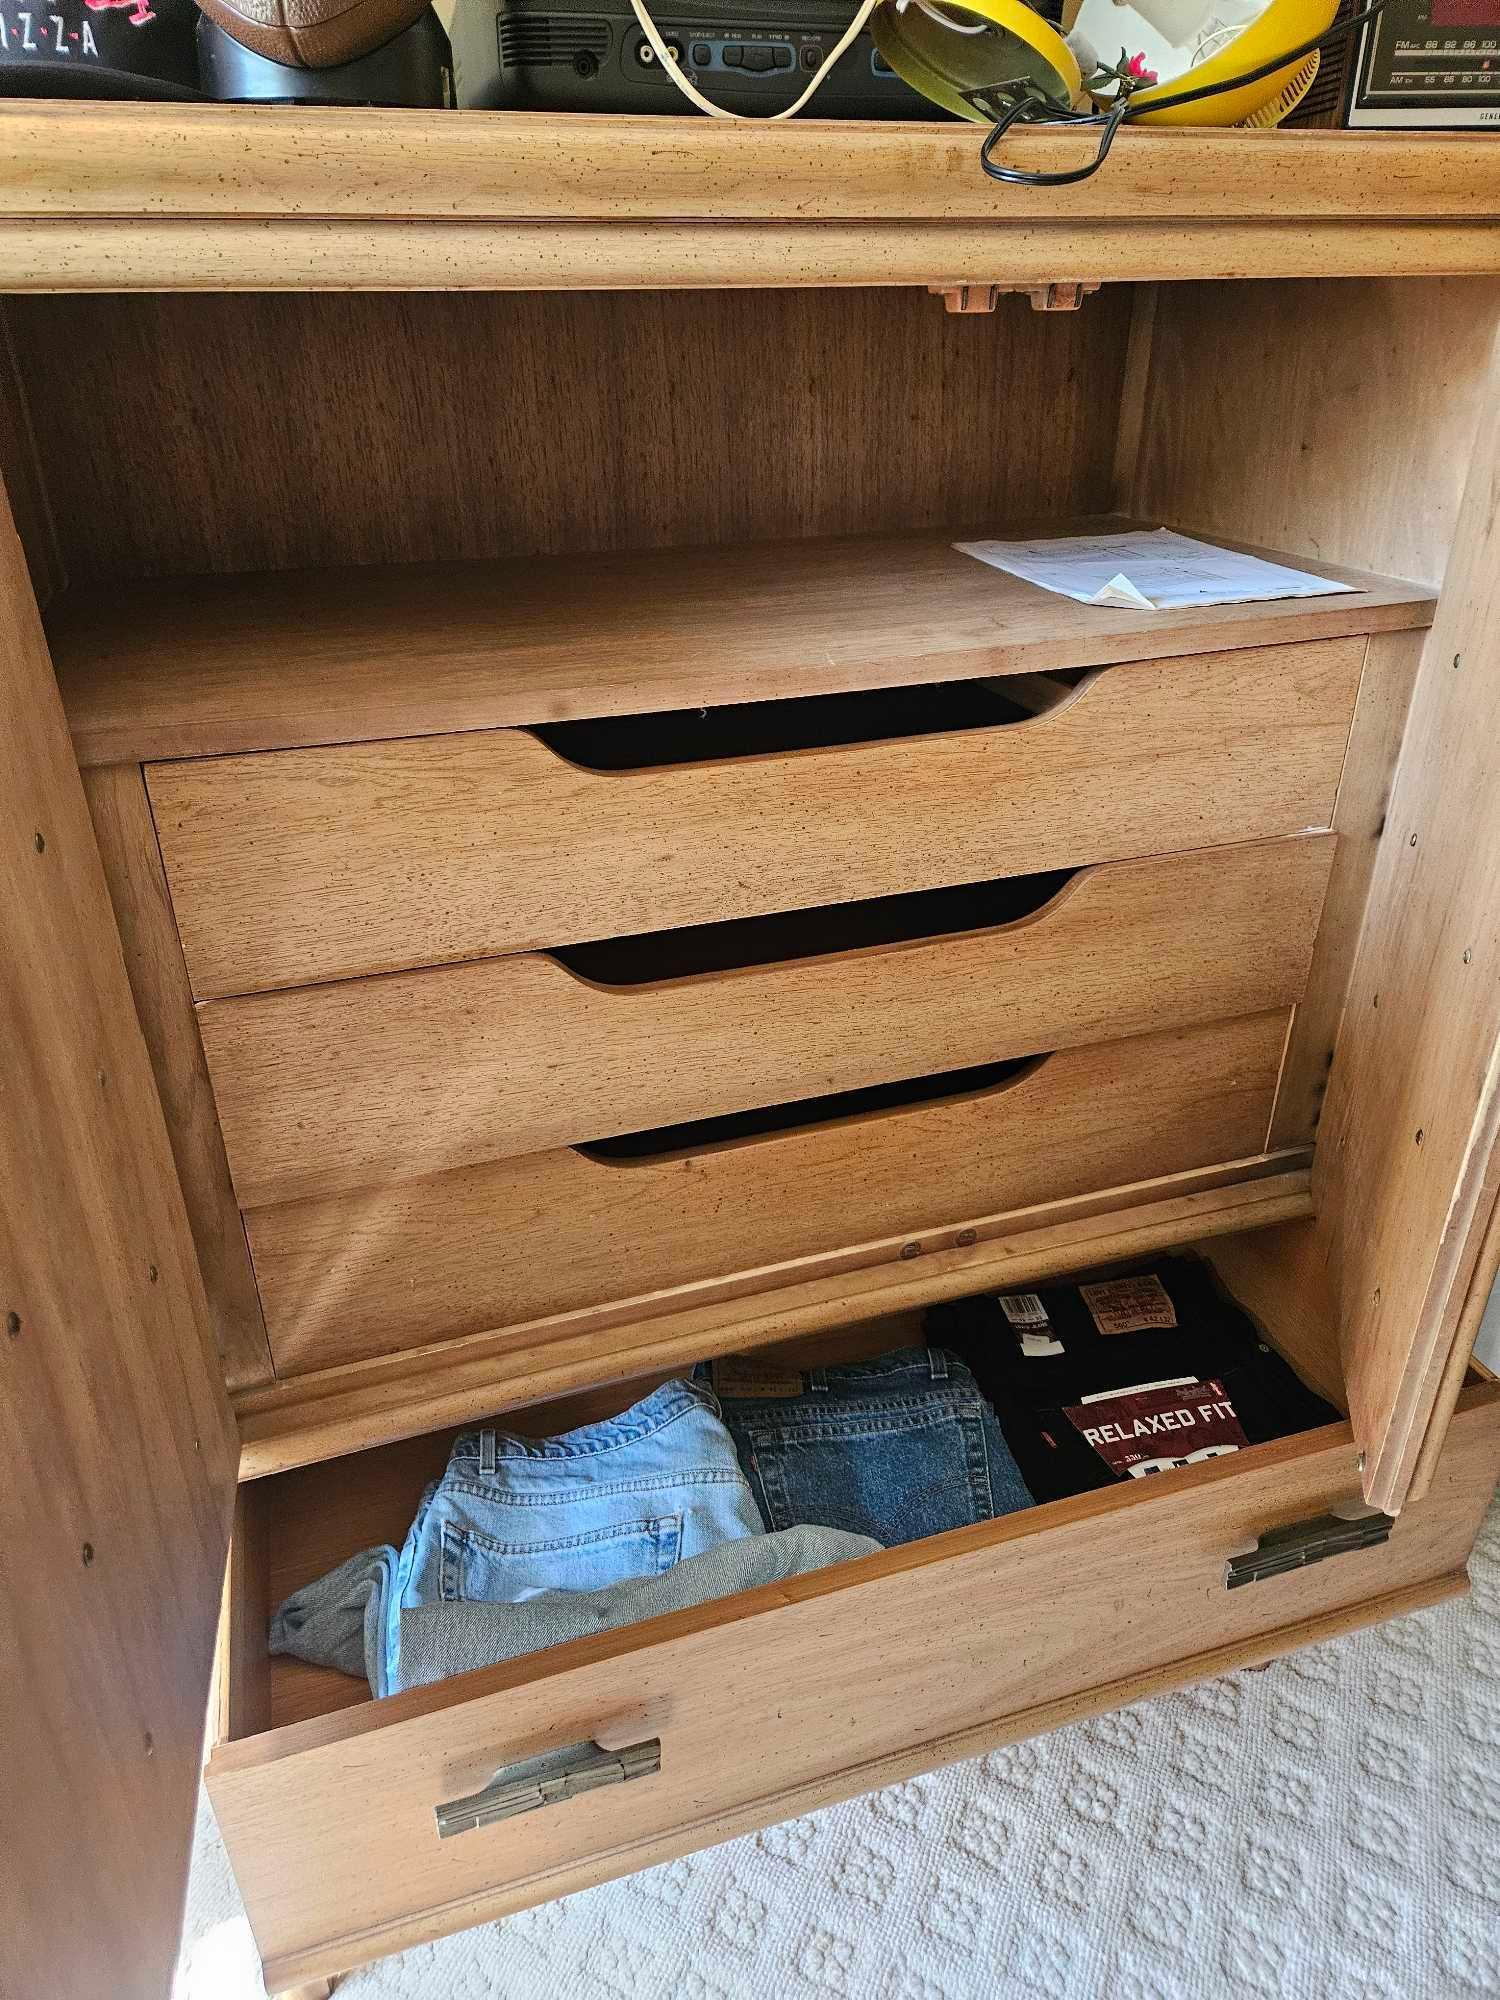 dresser with contents in and top b2